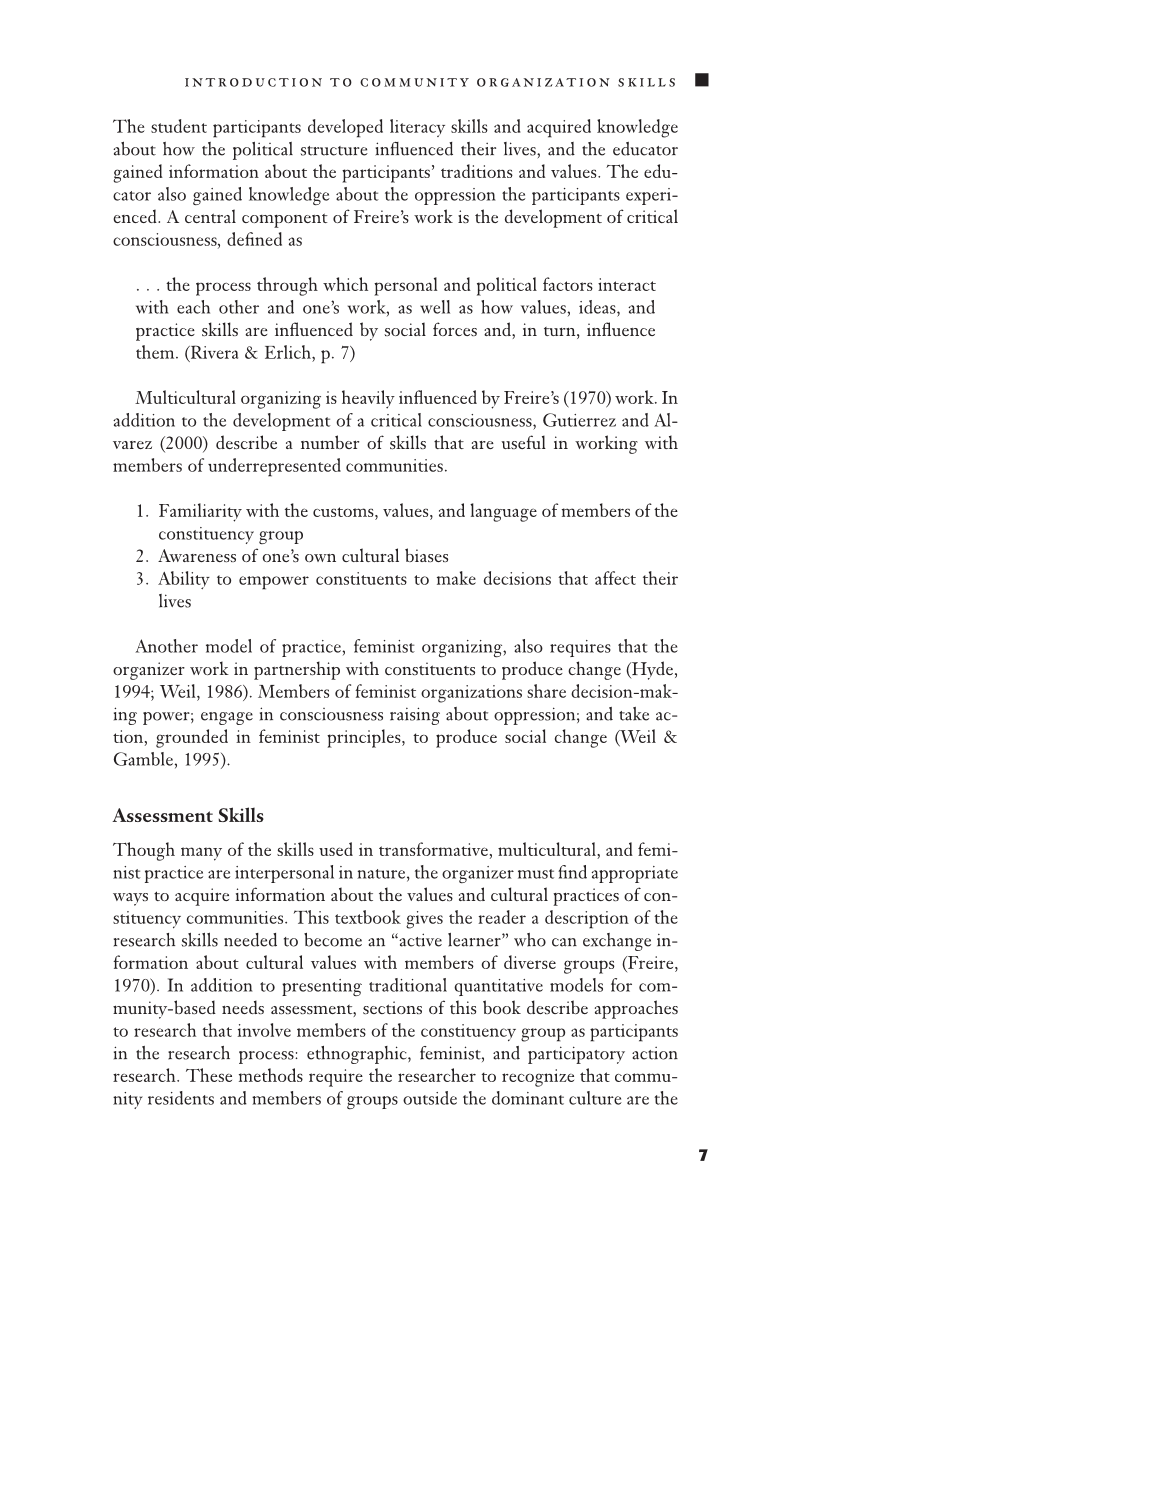 Analytical Skills for Community Organization Practice page 7